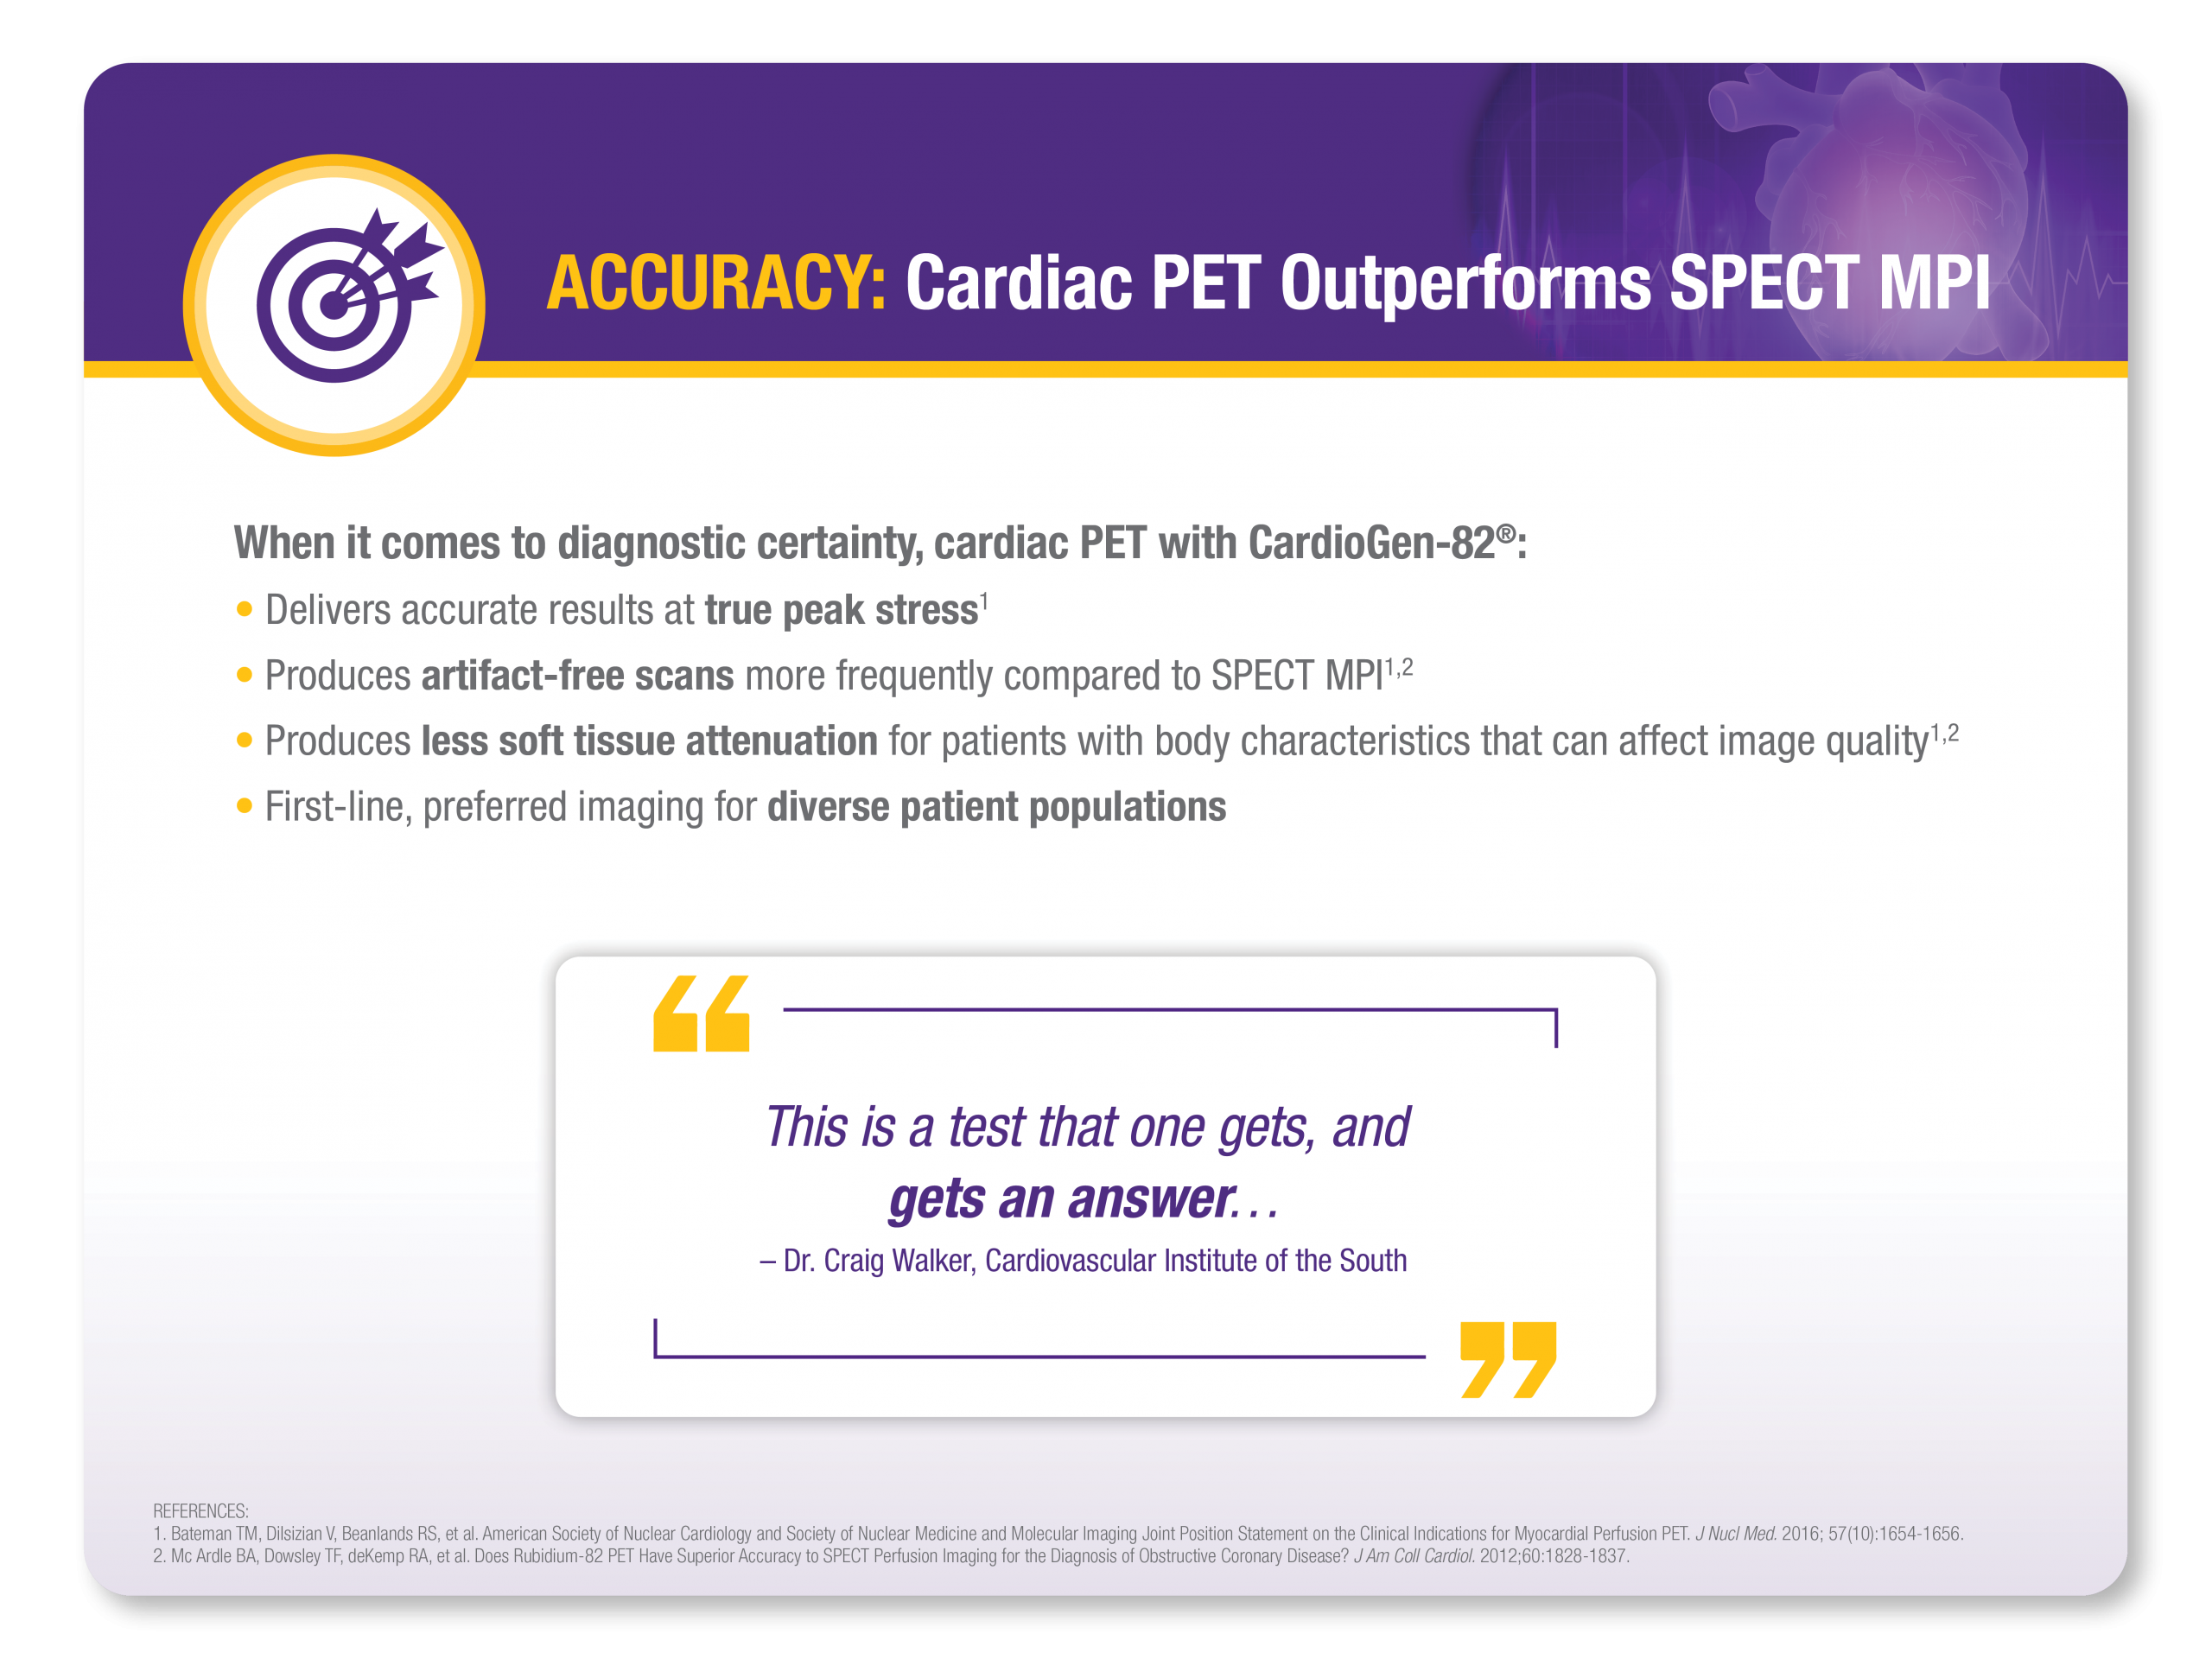 Accuracy: Cardiac PET Outperforms SPECT MPI.